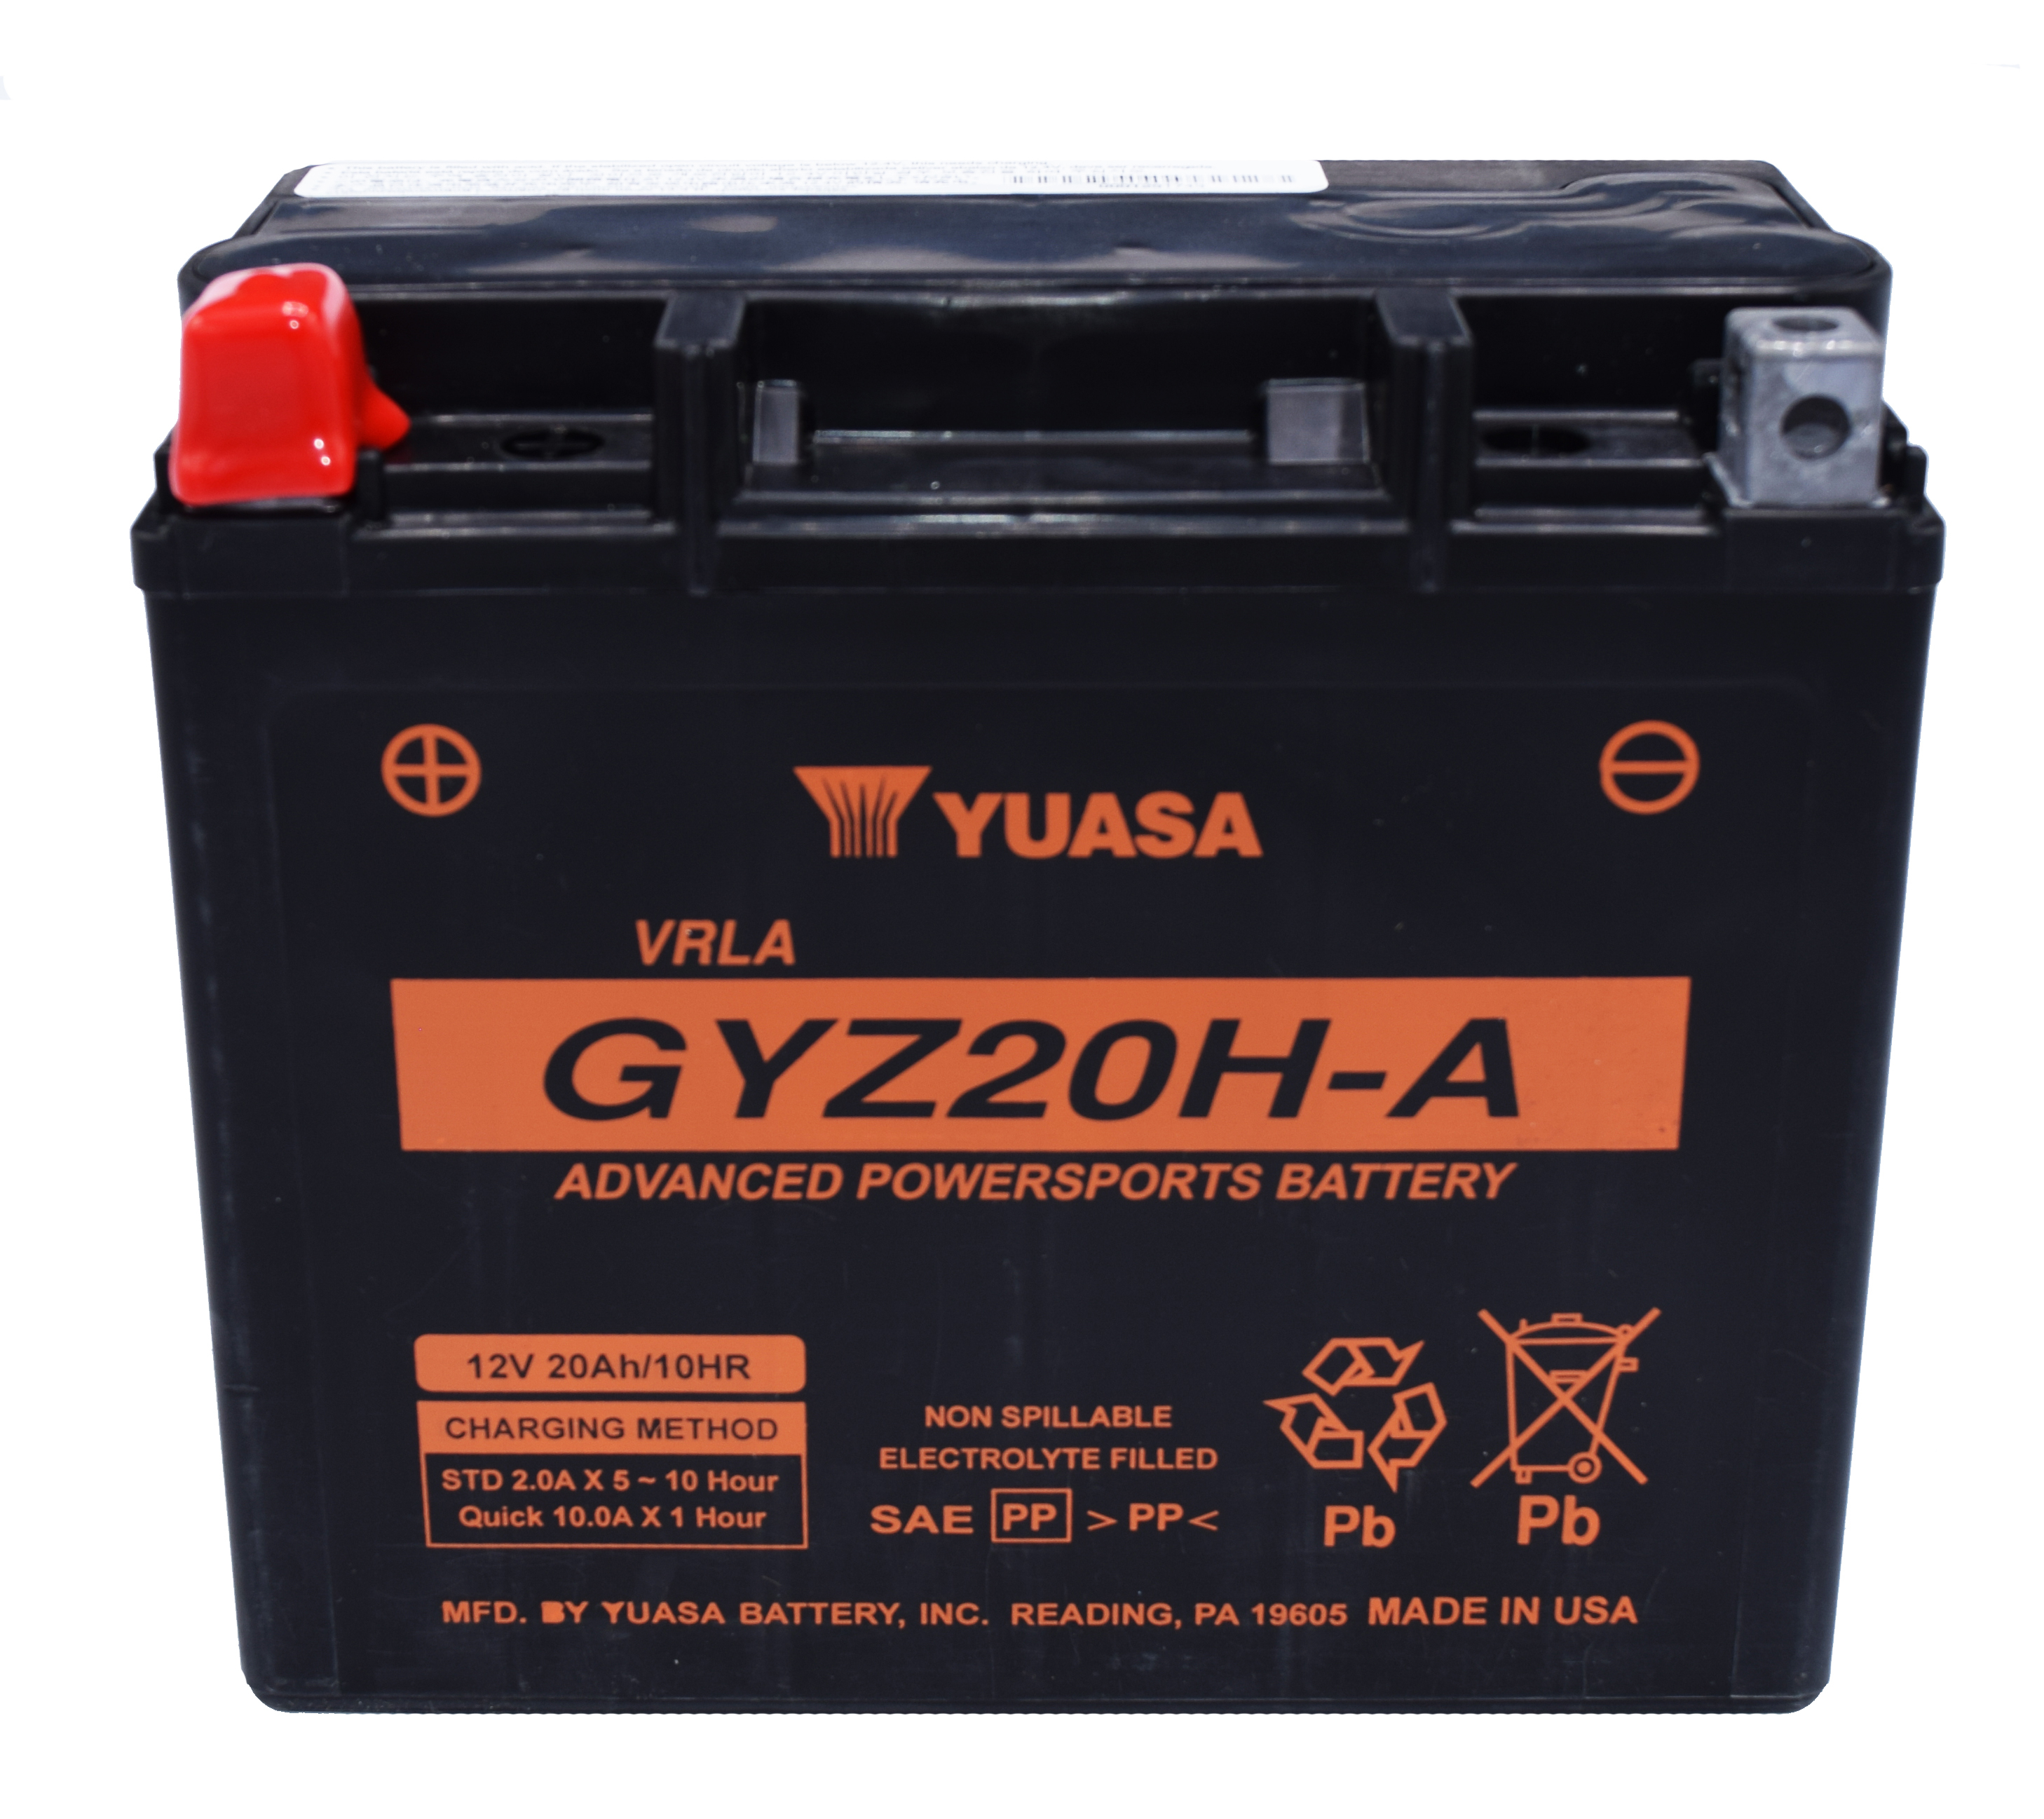 GYZ20H-A Factory-Activated AGM Maintenance-Free Battery - For 2019+ Honda Talon 1000R & 1000X 2/4 Seaters - Click Image to Close